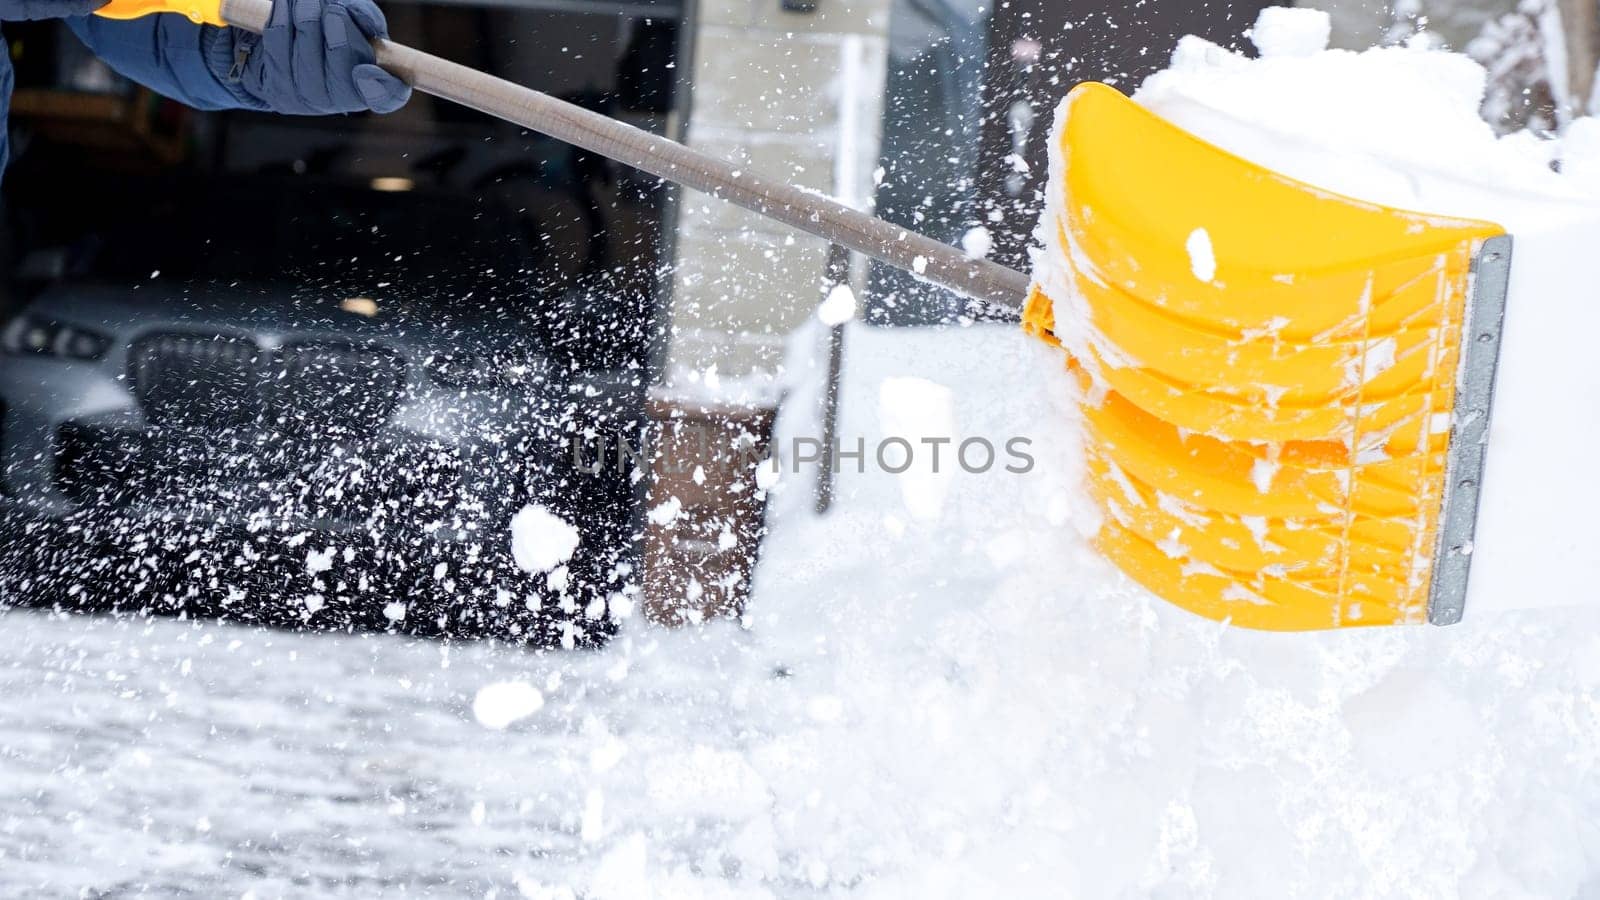 Man shoveling snow off of his driveway after a winter storm in Canada. Man with snow shovel cleans sidewalks in winter. Winter time. by JuliaDorian